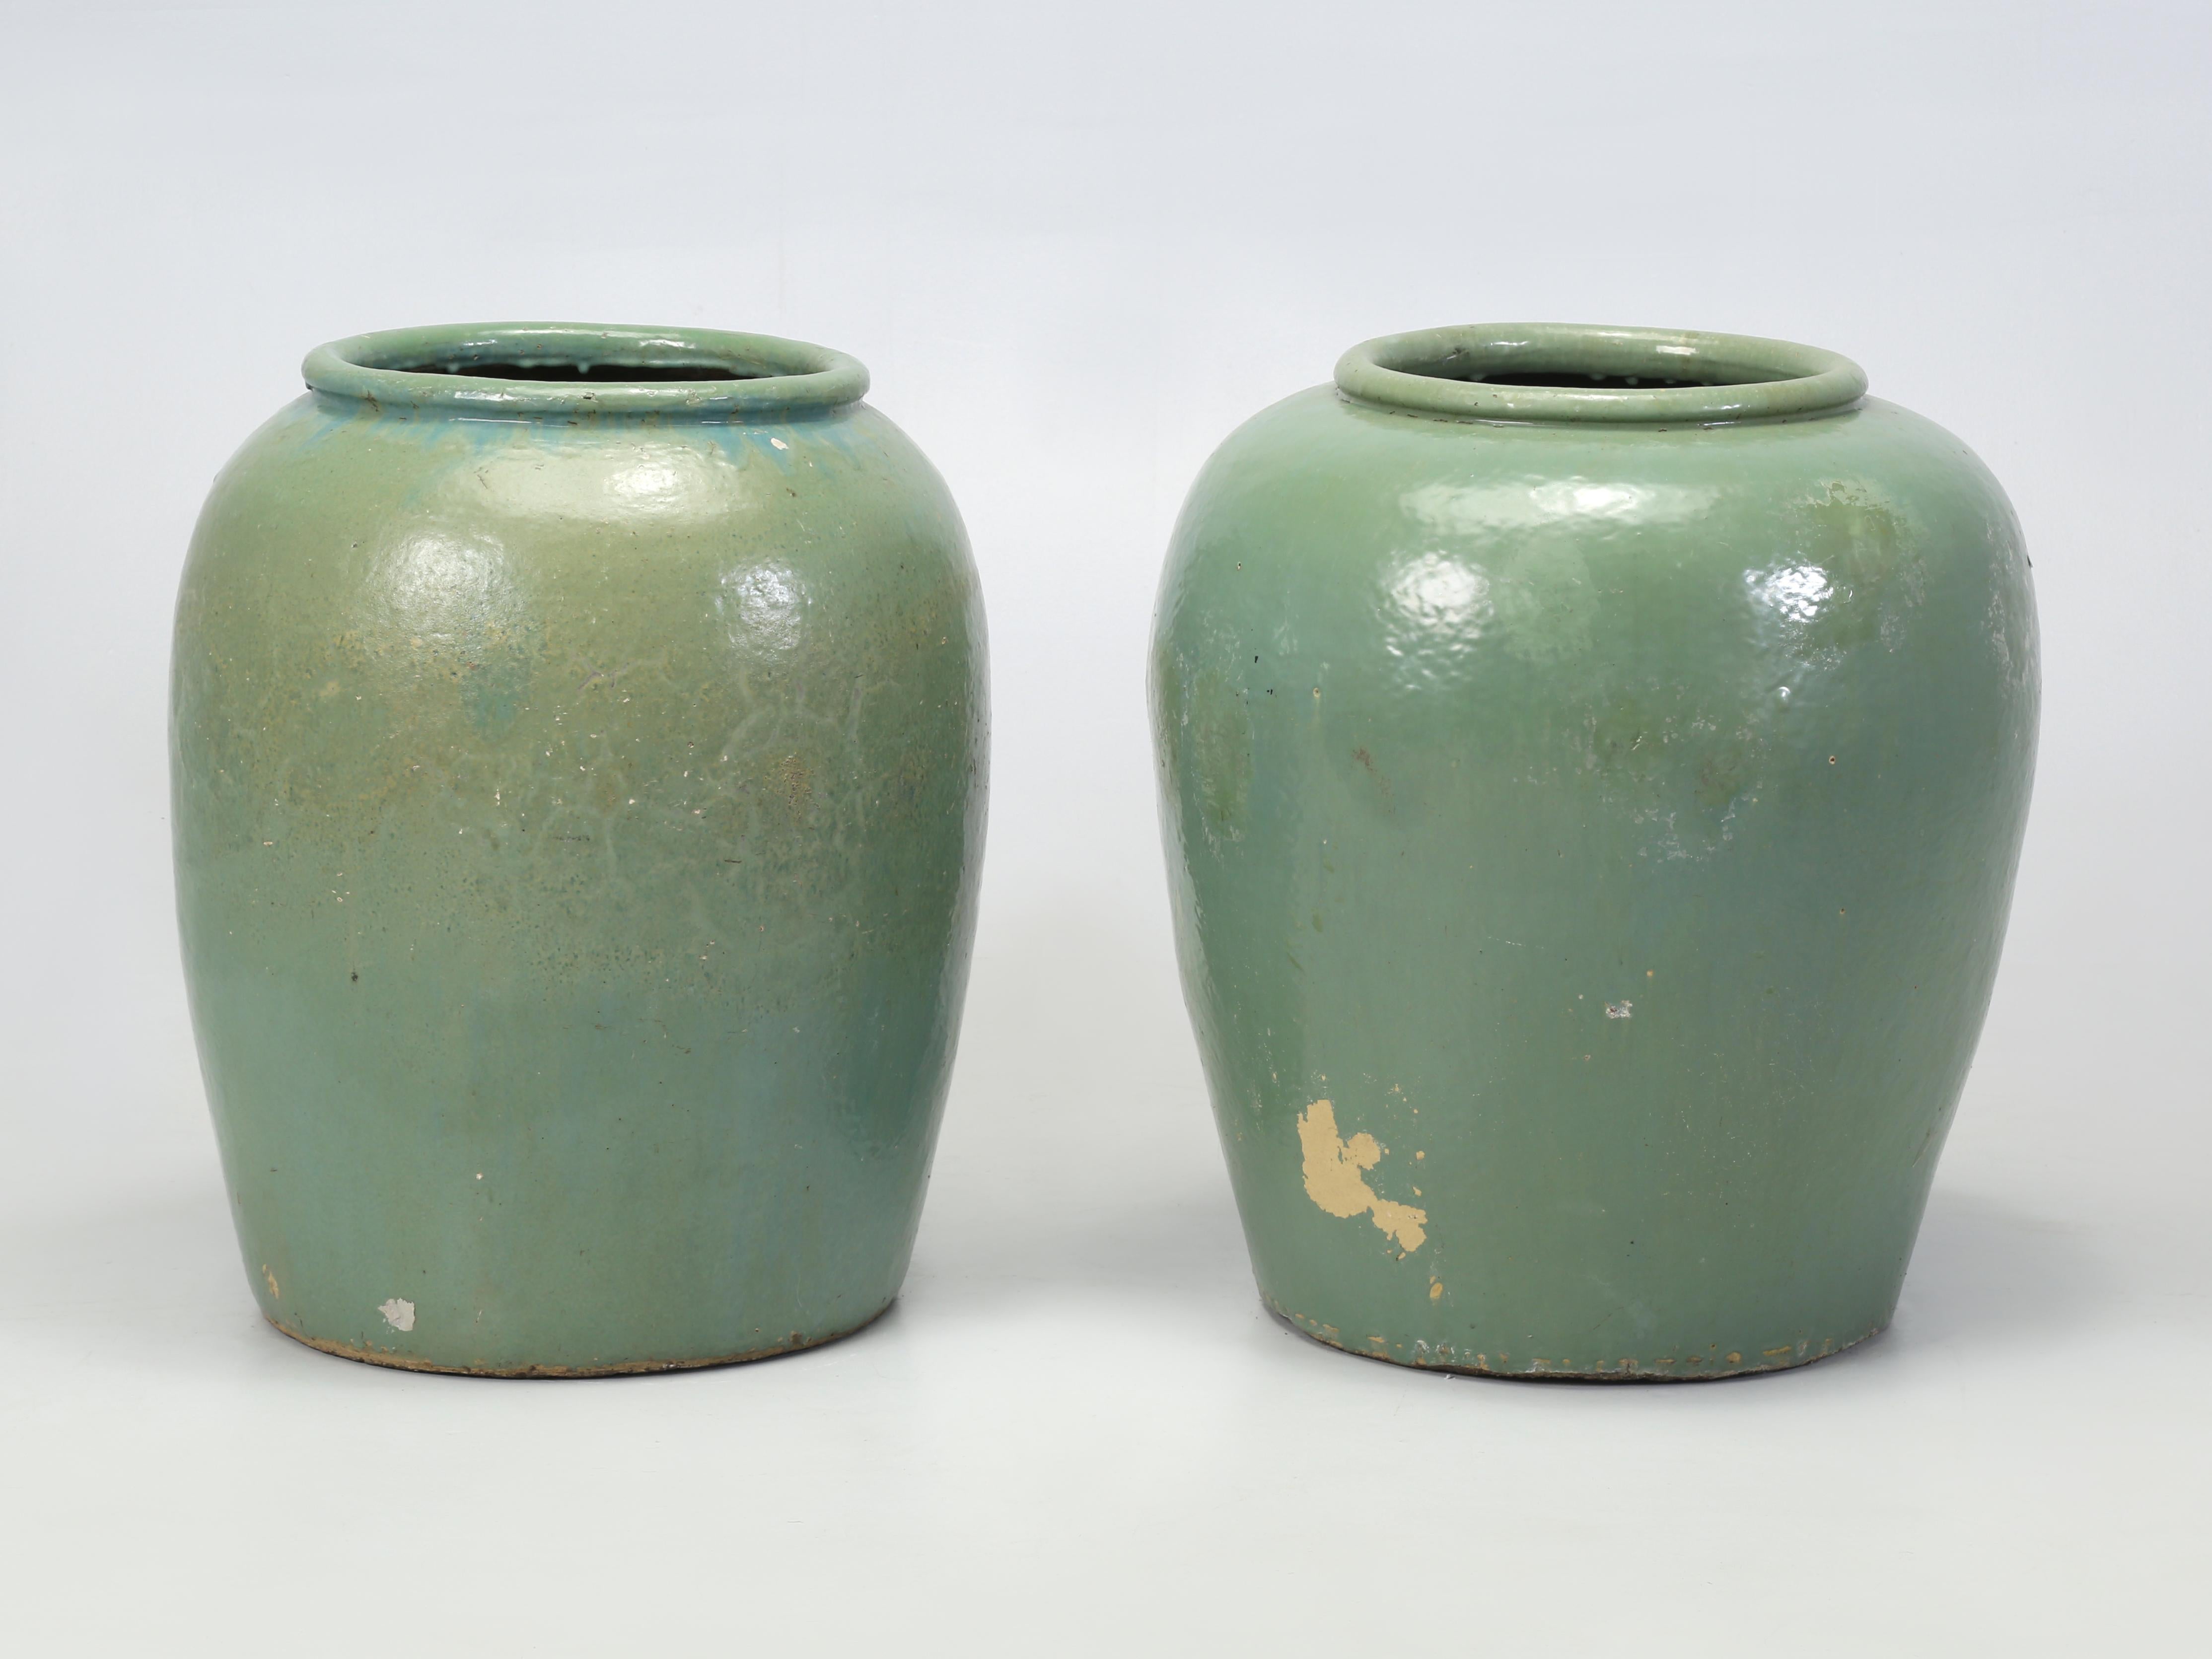 Pair of Glazed Green Vintage Planters found in Ireland. Around 25-30 years ago we used to be able to purchase these great looking terracotta glazed garden planters at an antique warehouse in the market town of Colne, Borough of Pendle in Lancashire,